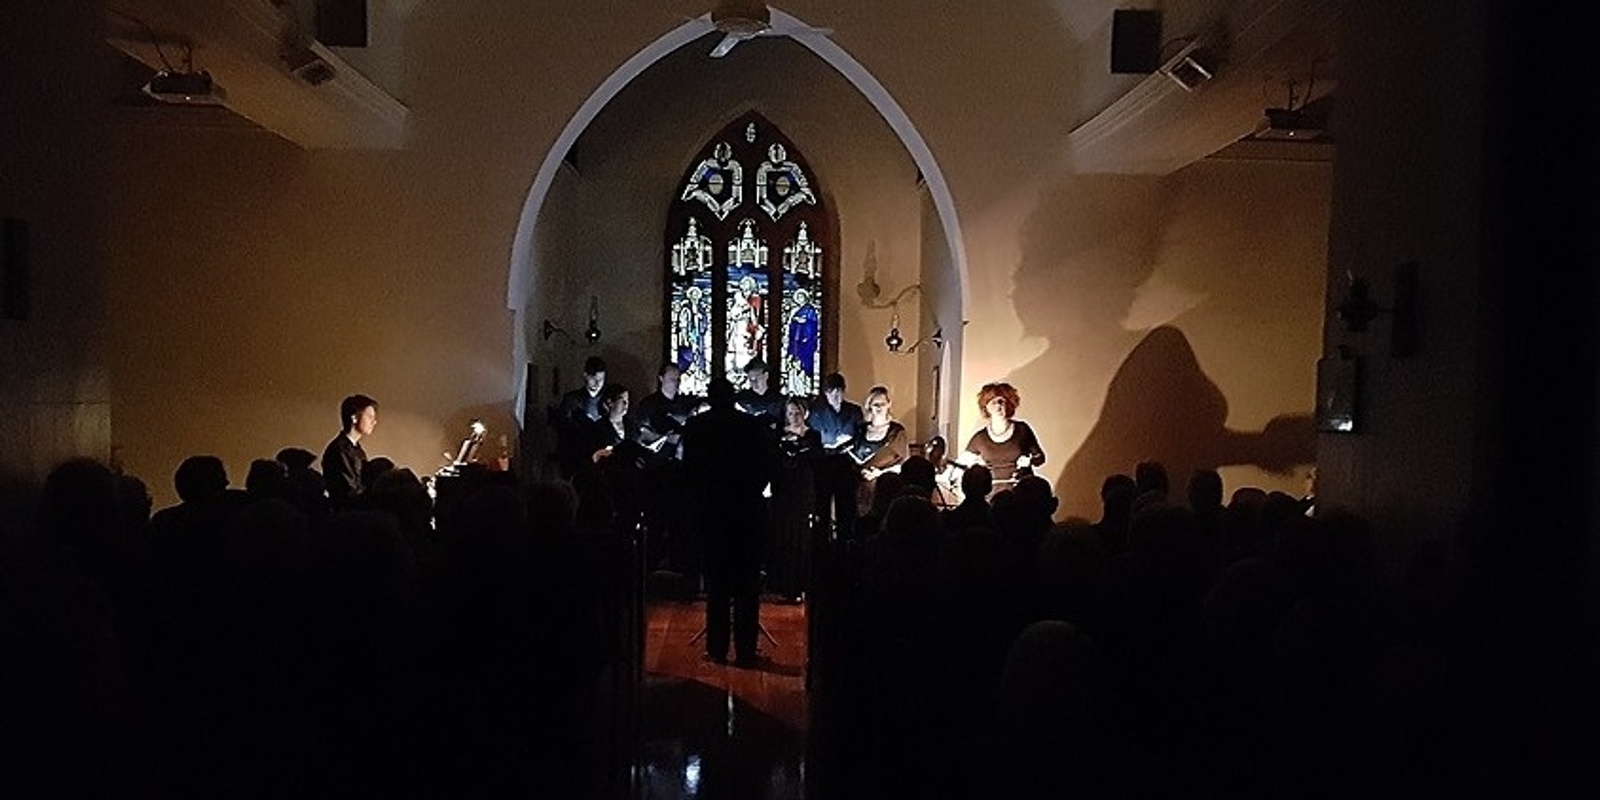 Bach in the Dark - Cello and Choir of St James Live Streaming